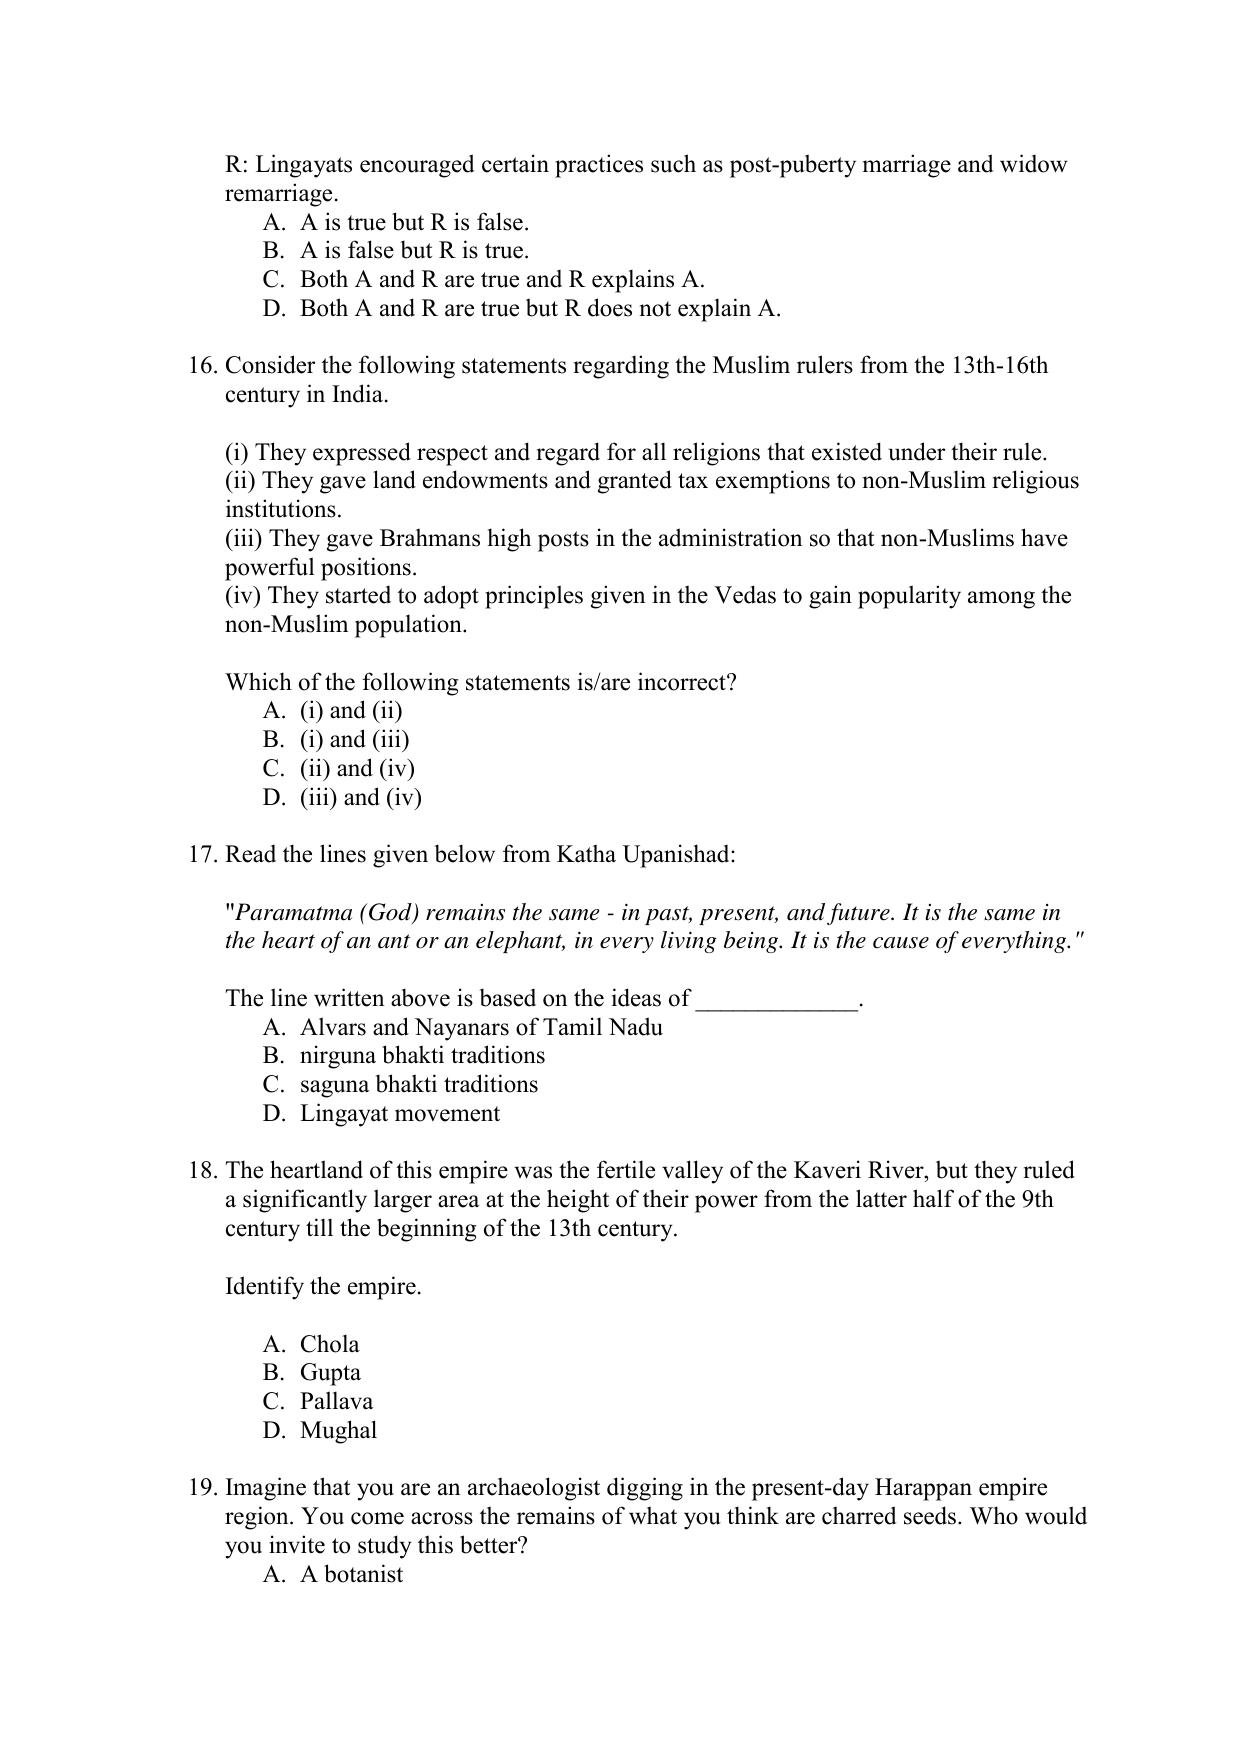 CBSE Class 12 History Term 1 Practice Questions 2021-22 - Page 4